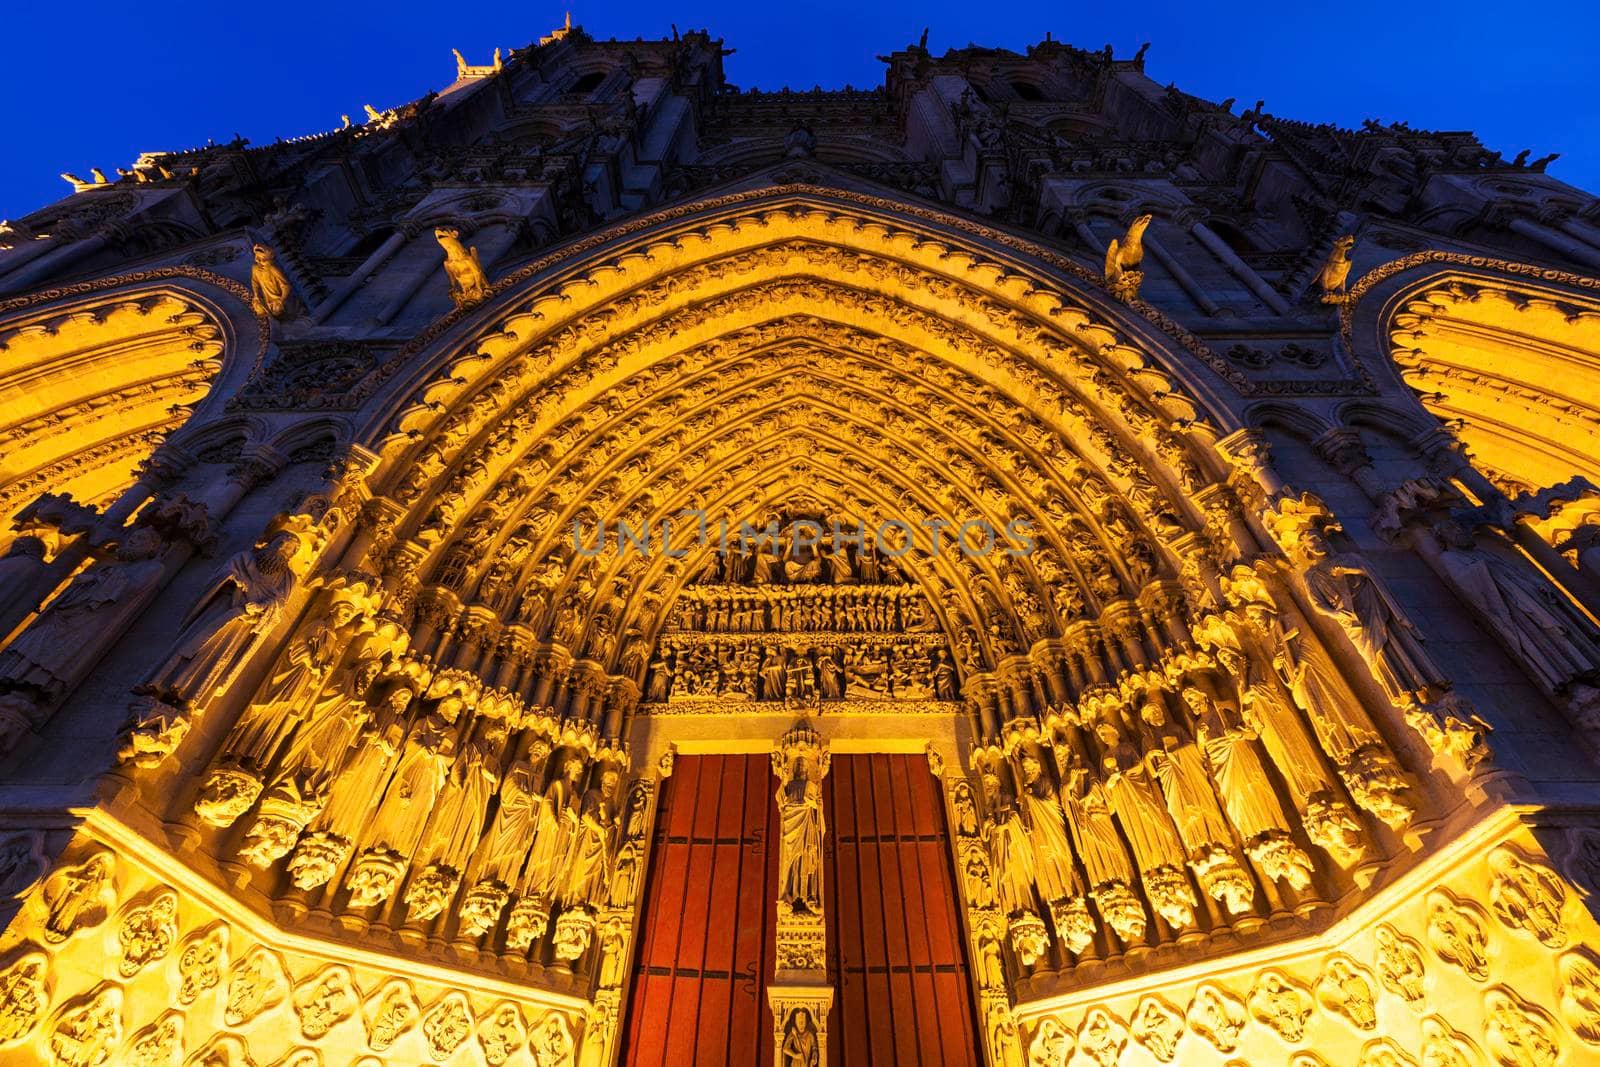 Cathedral of Our Lady of Amiens. Amiens, Nord-Pas-de-Calais-Picardy, France.